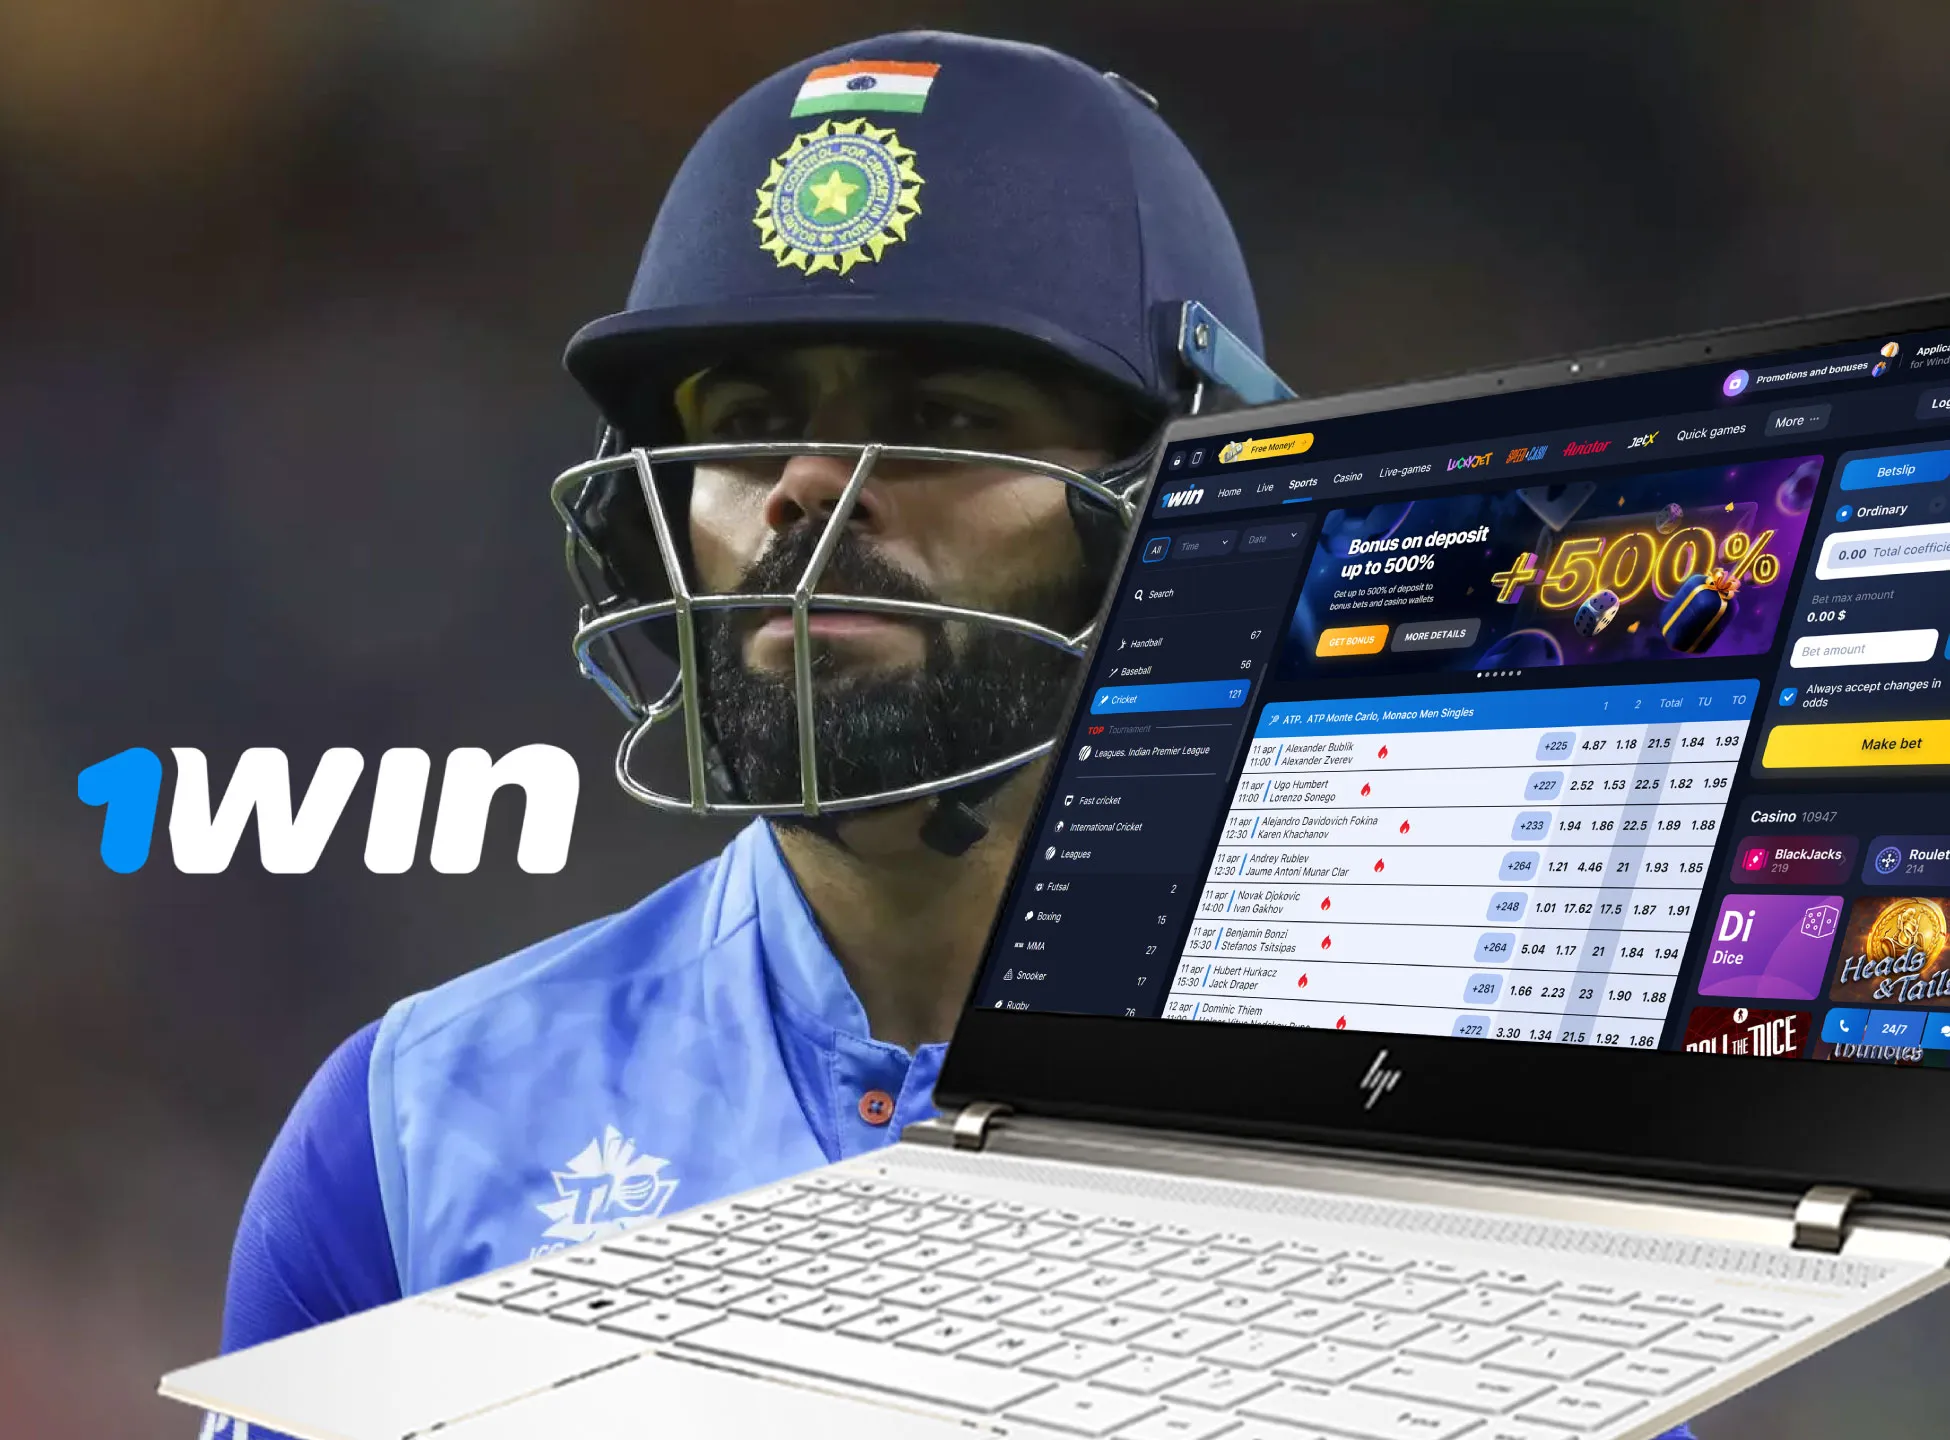 Download the 1win app to start betting on cricket.